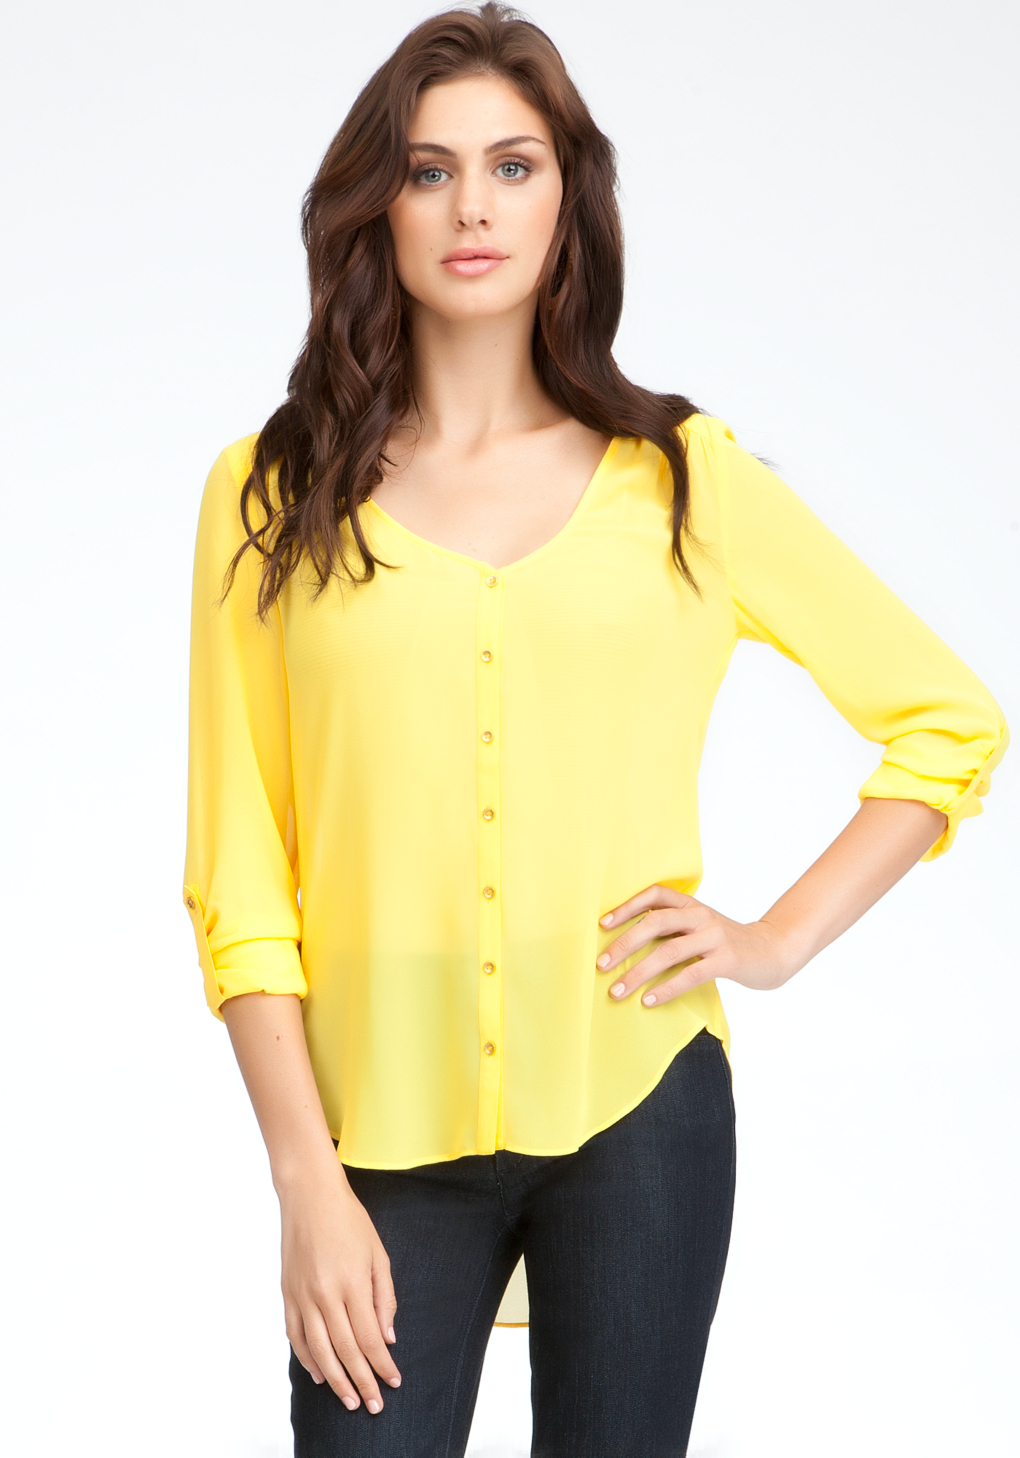 Lyst - Bebe High Low Shirt Blouse in Yellow